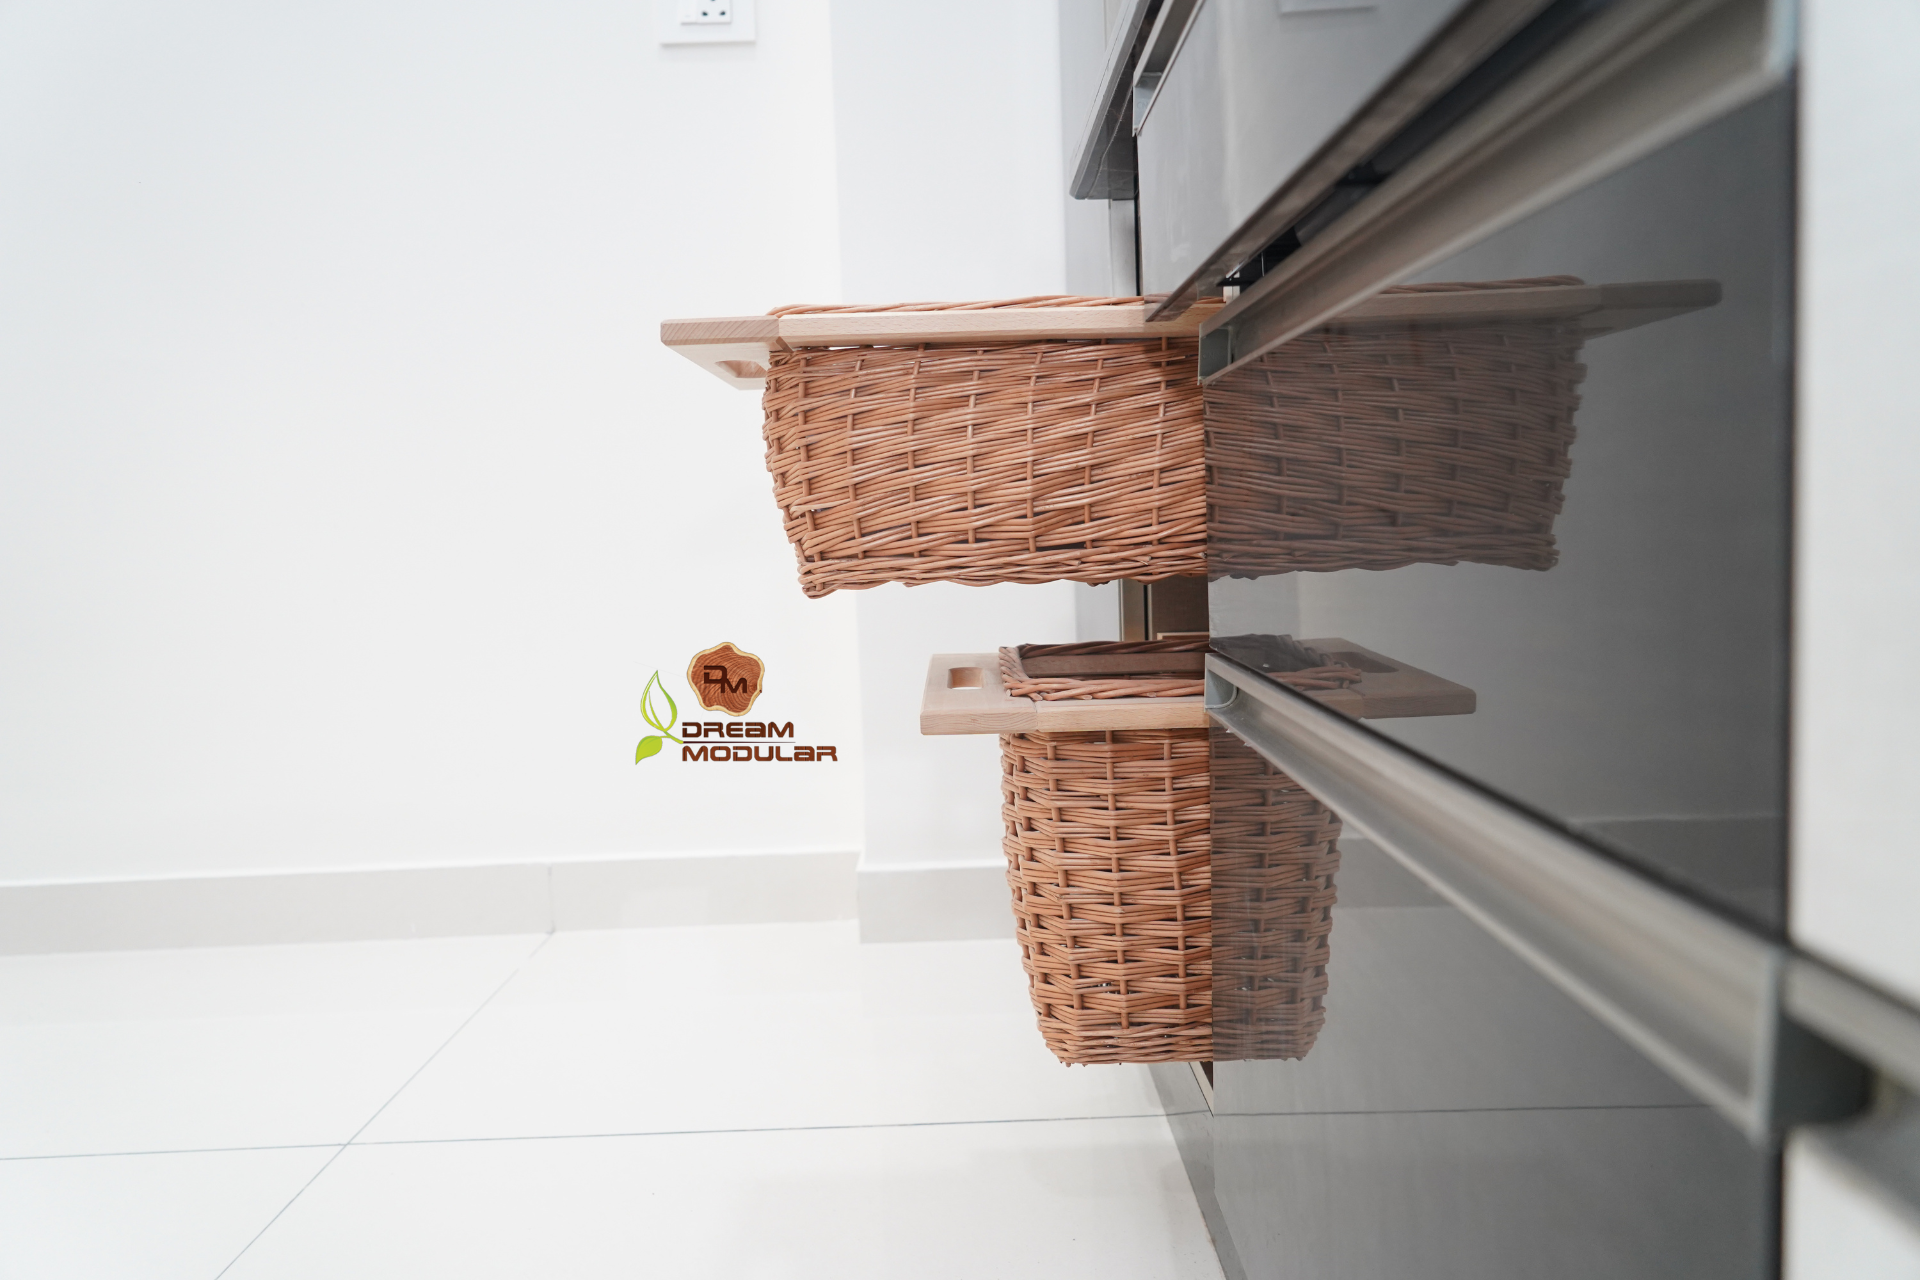 A wicker basket hanging on the side of utensils cabinet, adding a stylish touch to the interior design.